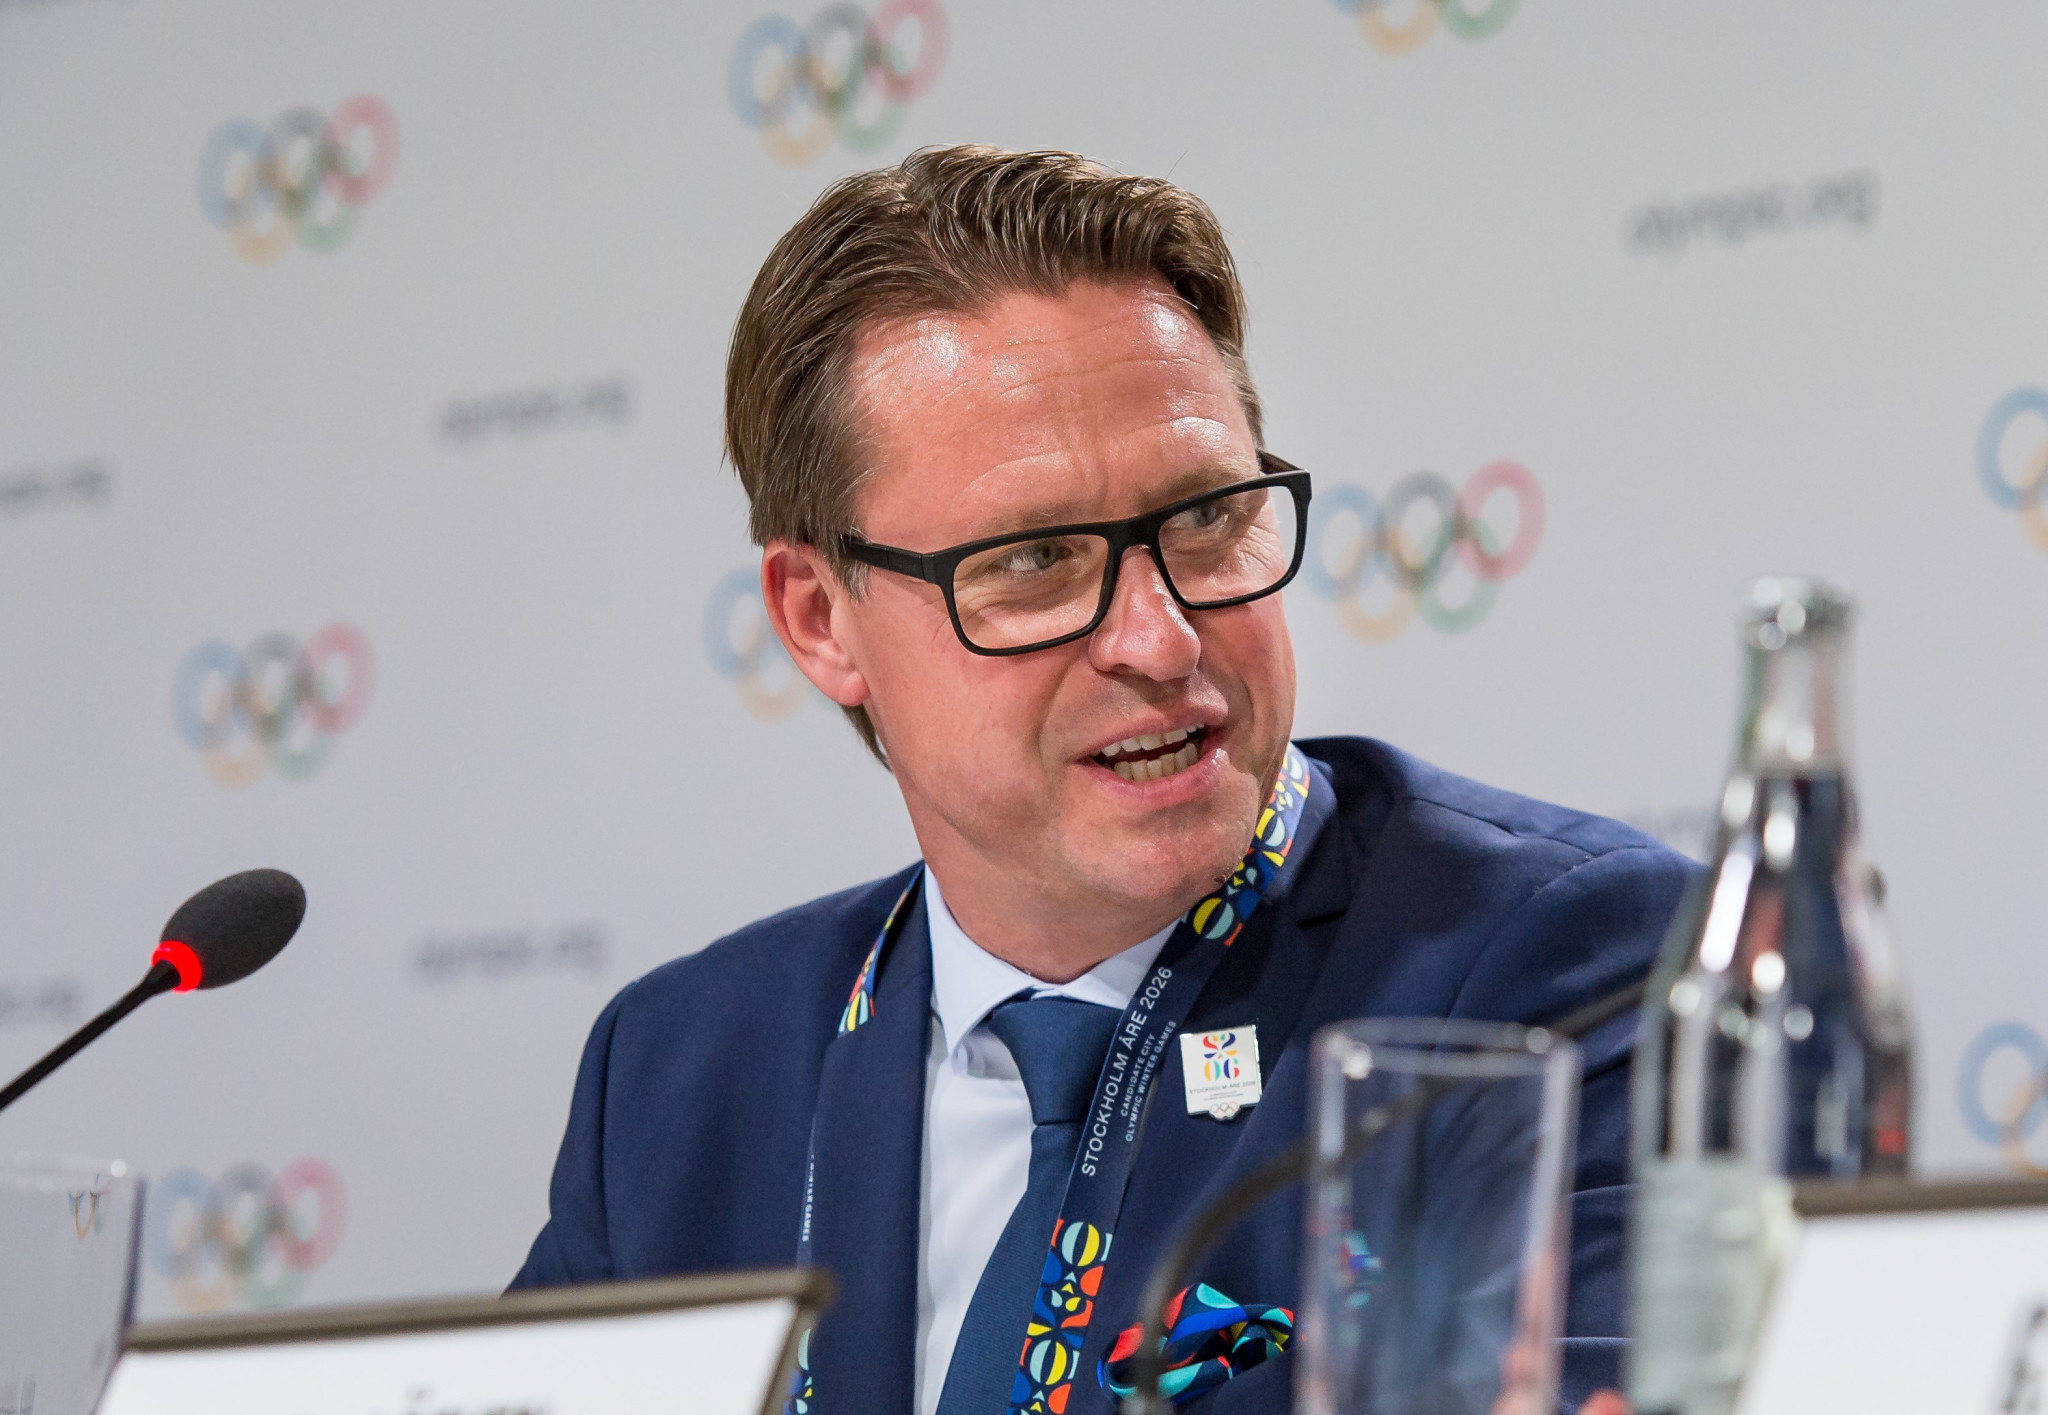 Swedish Olympic Committee rules out Beijing 2022 boycott as Samuelsson slams "reprehensible" Chinese Games